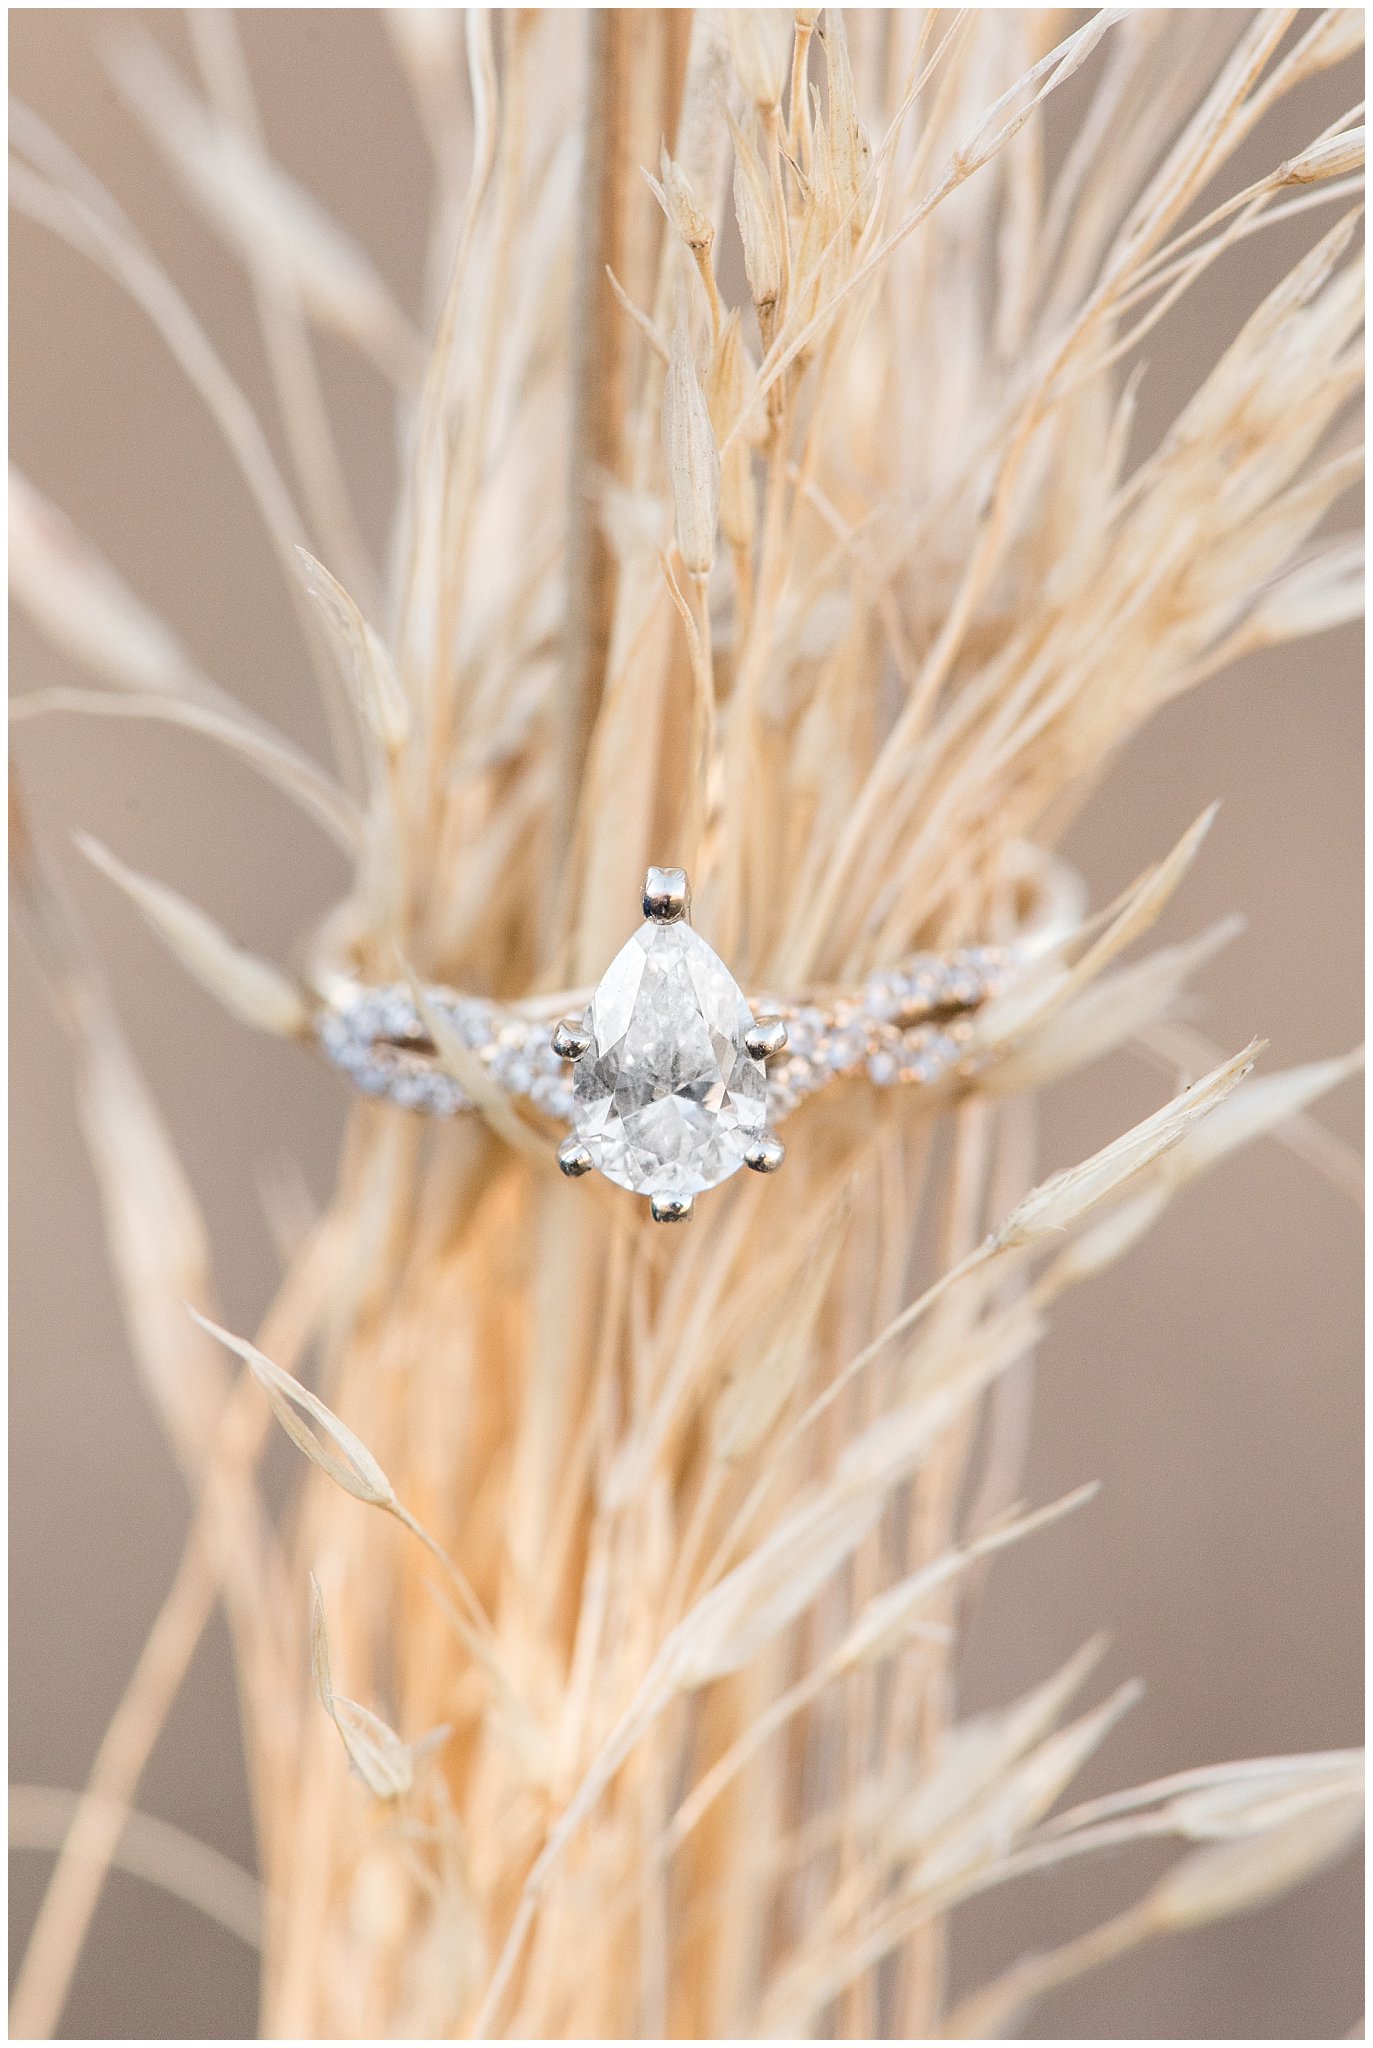 Ring shot photography on wheat grass or field grass | Davis County Fall Engagement | Utah Wedding Photographers | Jessie and Dallin